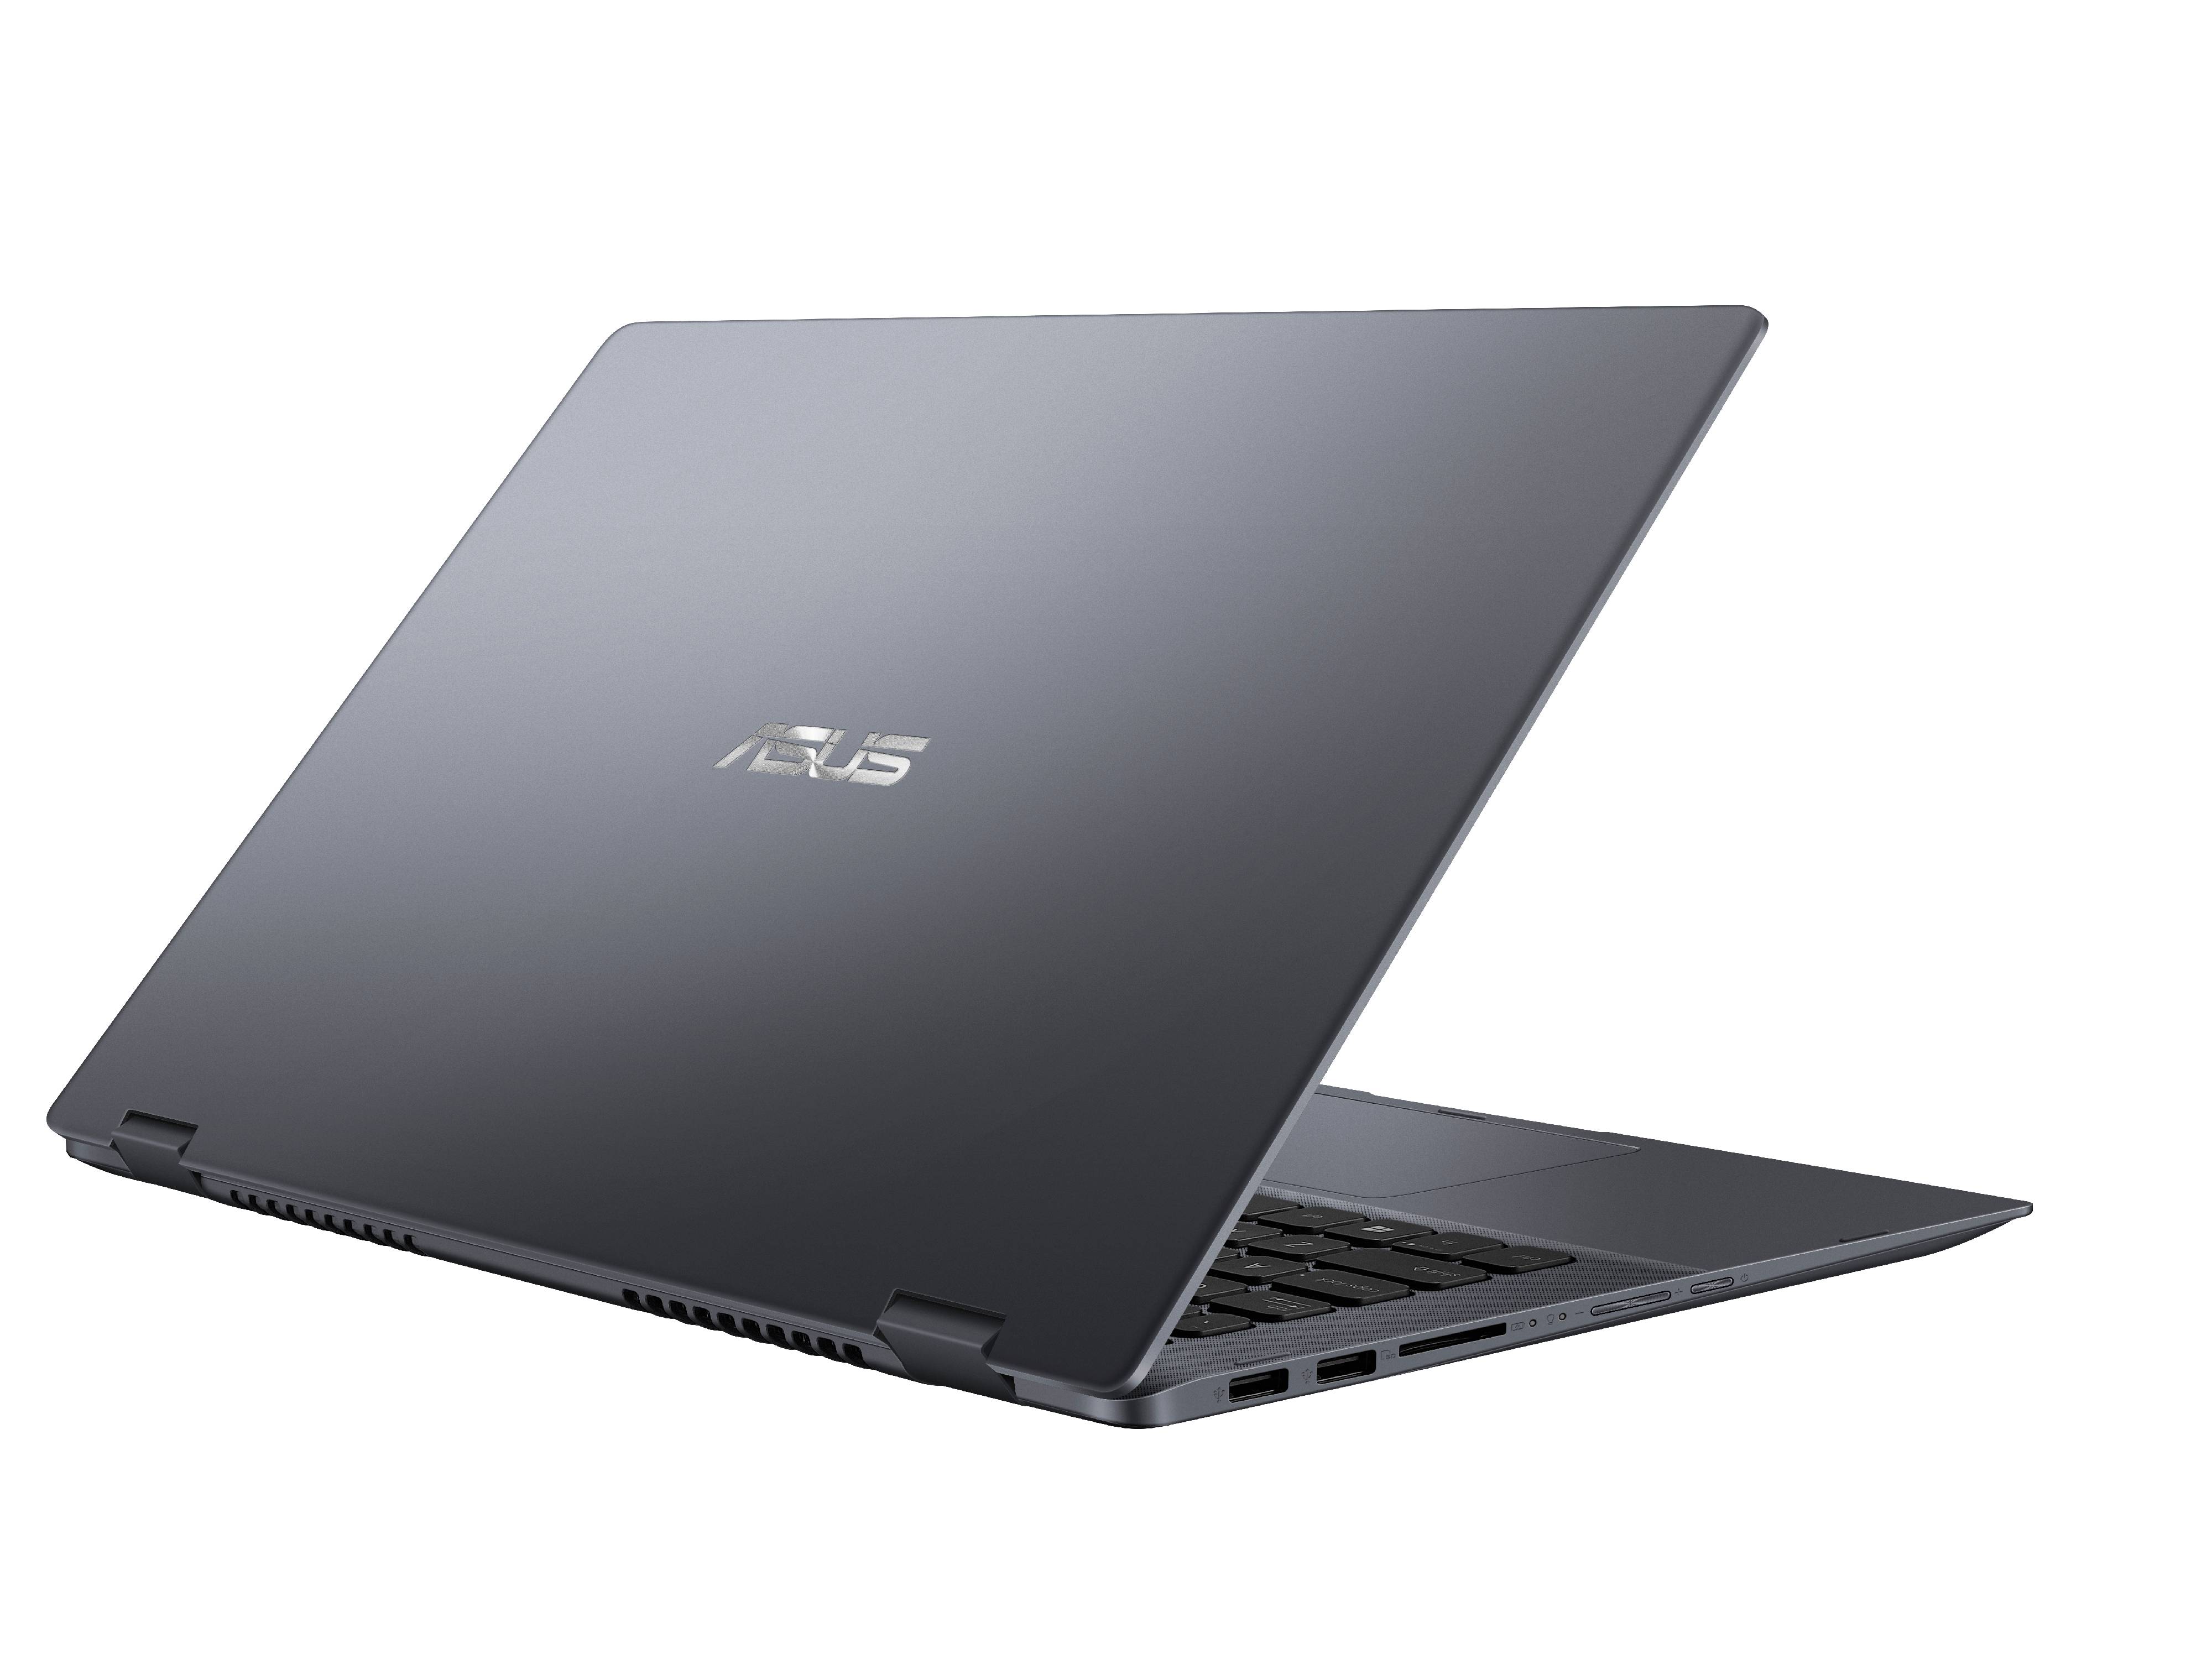 ASUS VivoBook Flip 14 Thin and Lightweight 2-in-1 Full HD Touchscreen Laptop, 8th Gen Intel Core i3-8130U Processor (up to 3.4GHz), 4GB DDR4 RAM, 128GB SSD, Windows 10, TP412UA-IH31T - image 3 of 12